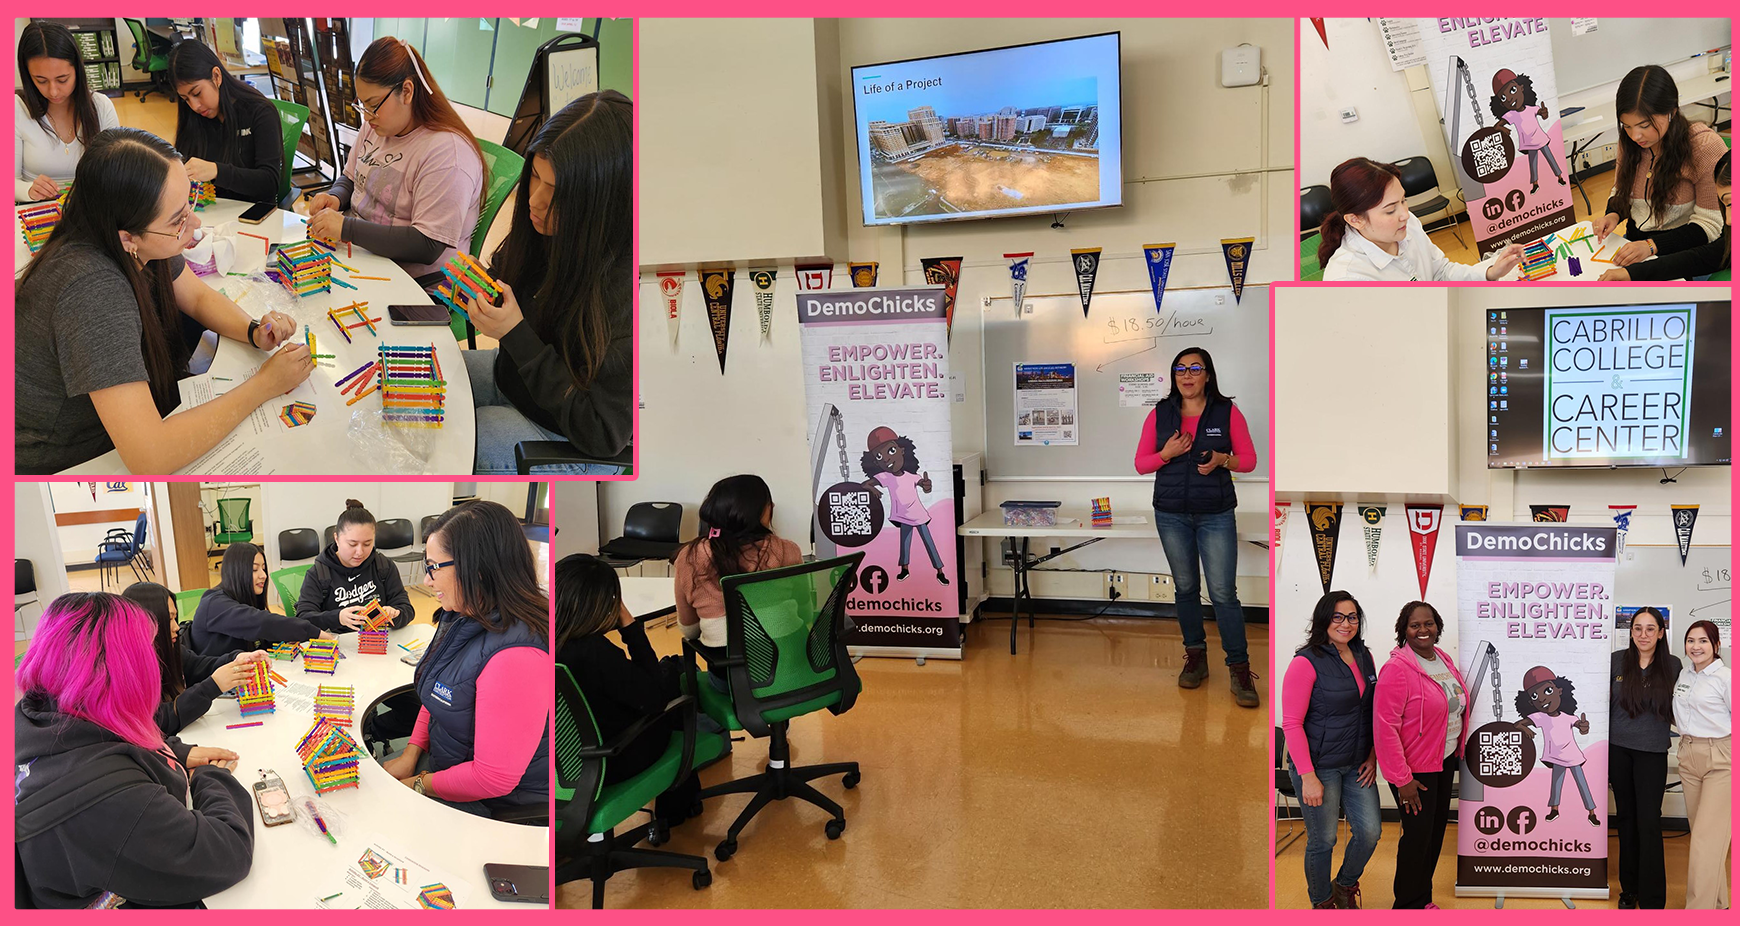 Images of workshops during Women in Construction Week.